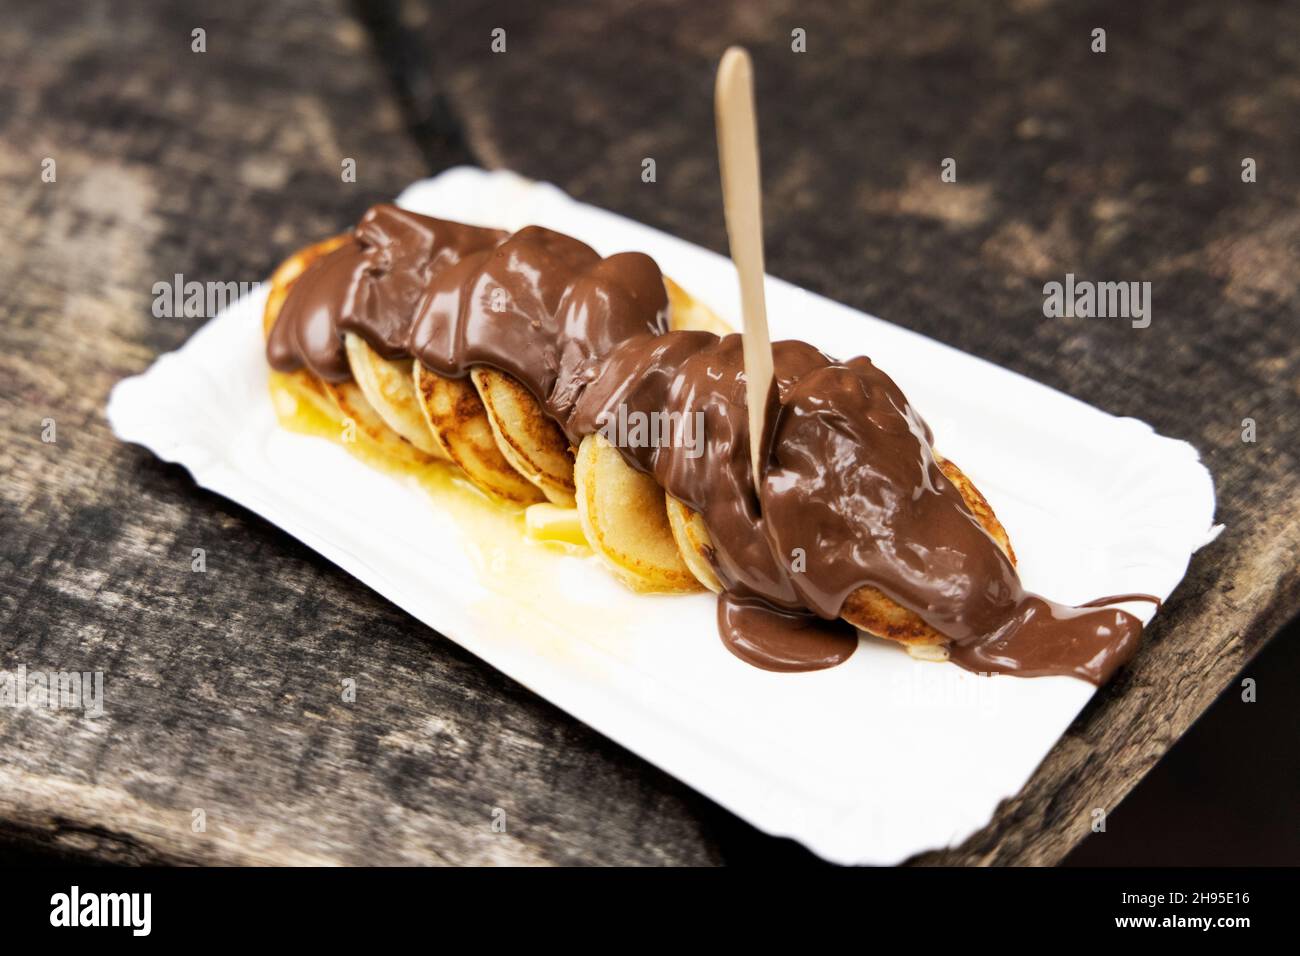 https://c8.alamy.com/comp/2H95E16/poffertjes-tiny-puffed-dutch-pancakes-with-nutella-from-the-albert-cuyp-market-in-amsterdam-netherlands-2H95E16.jpg